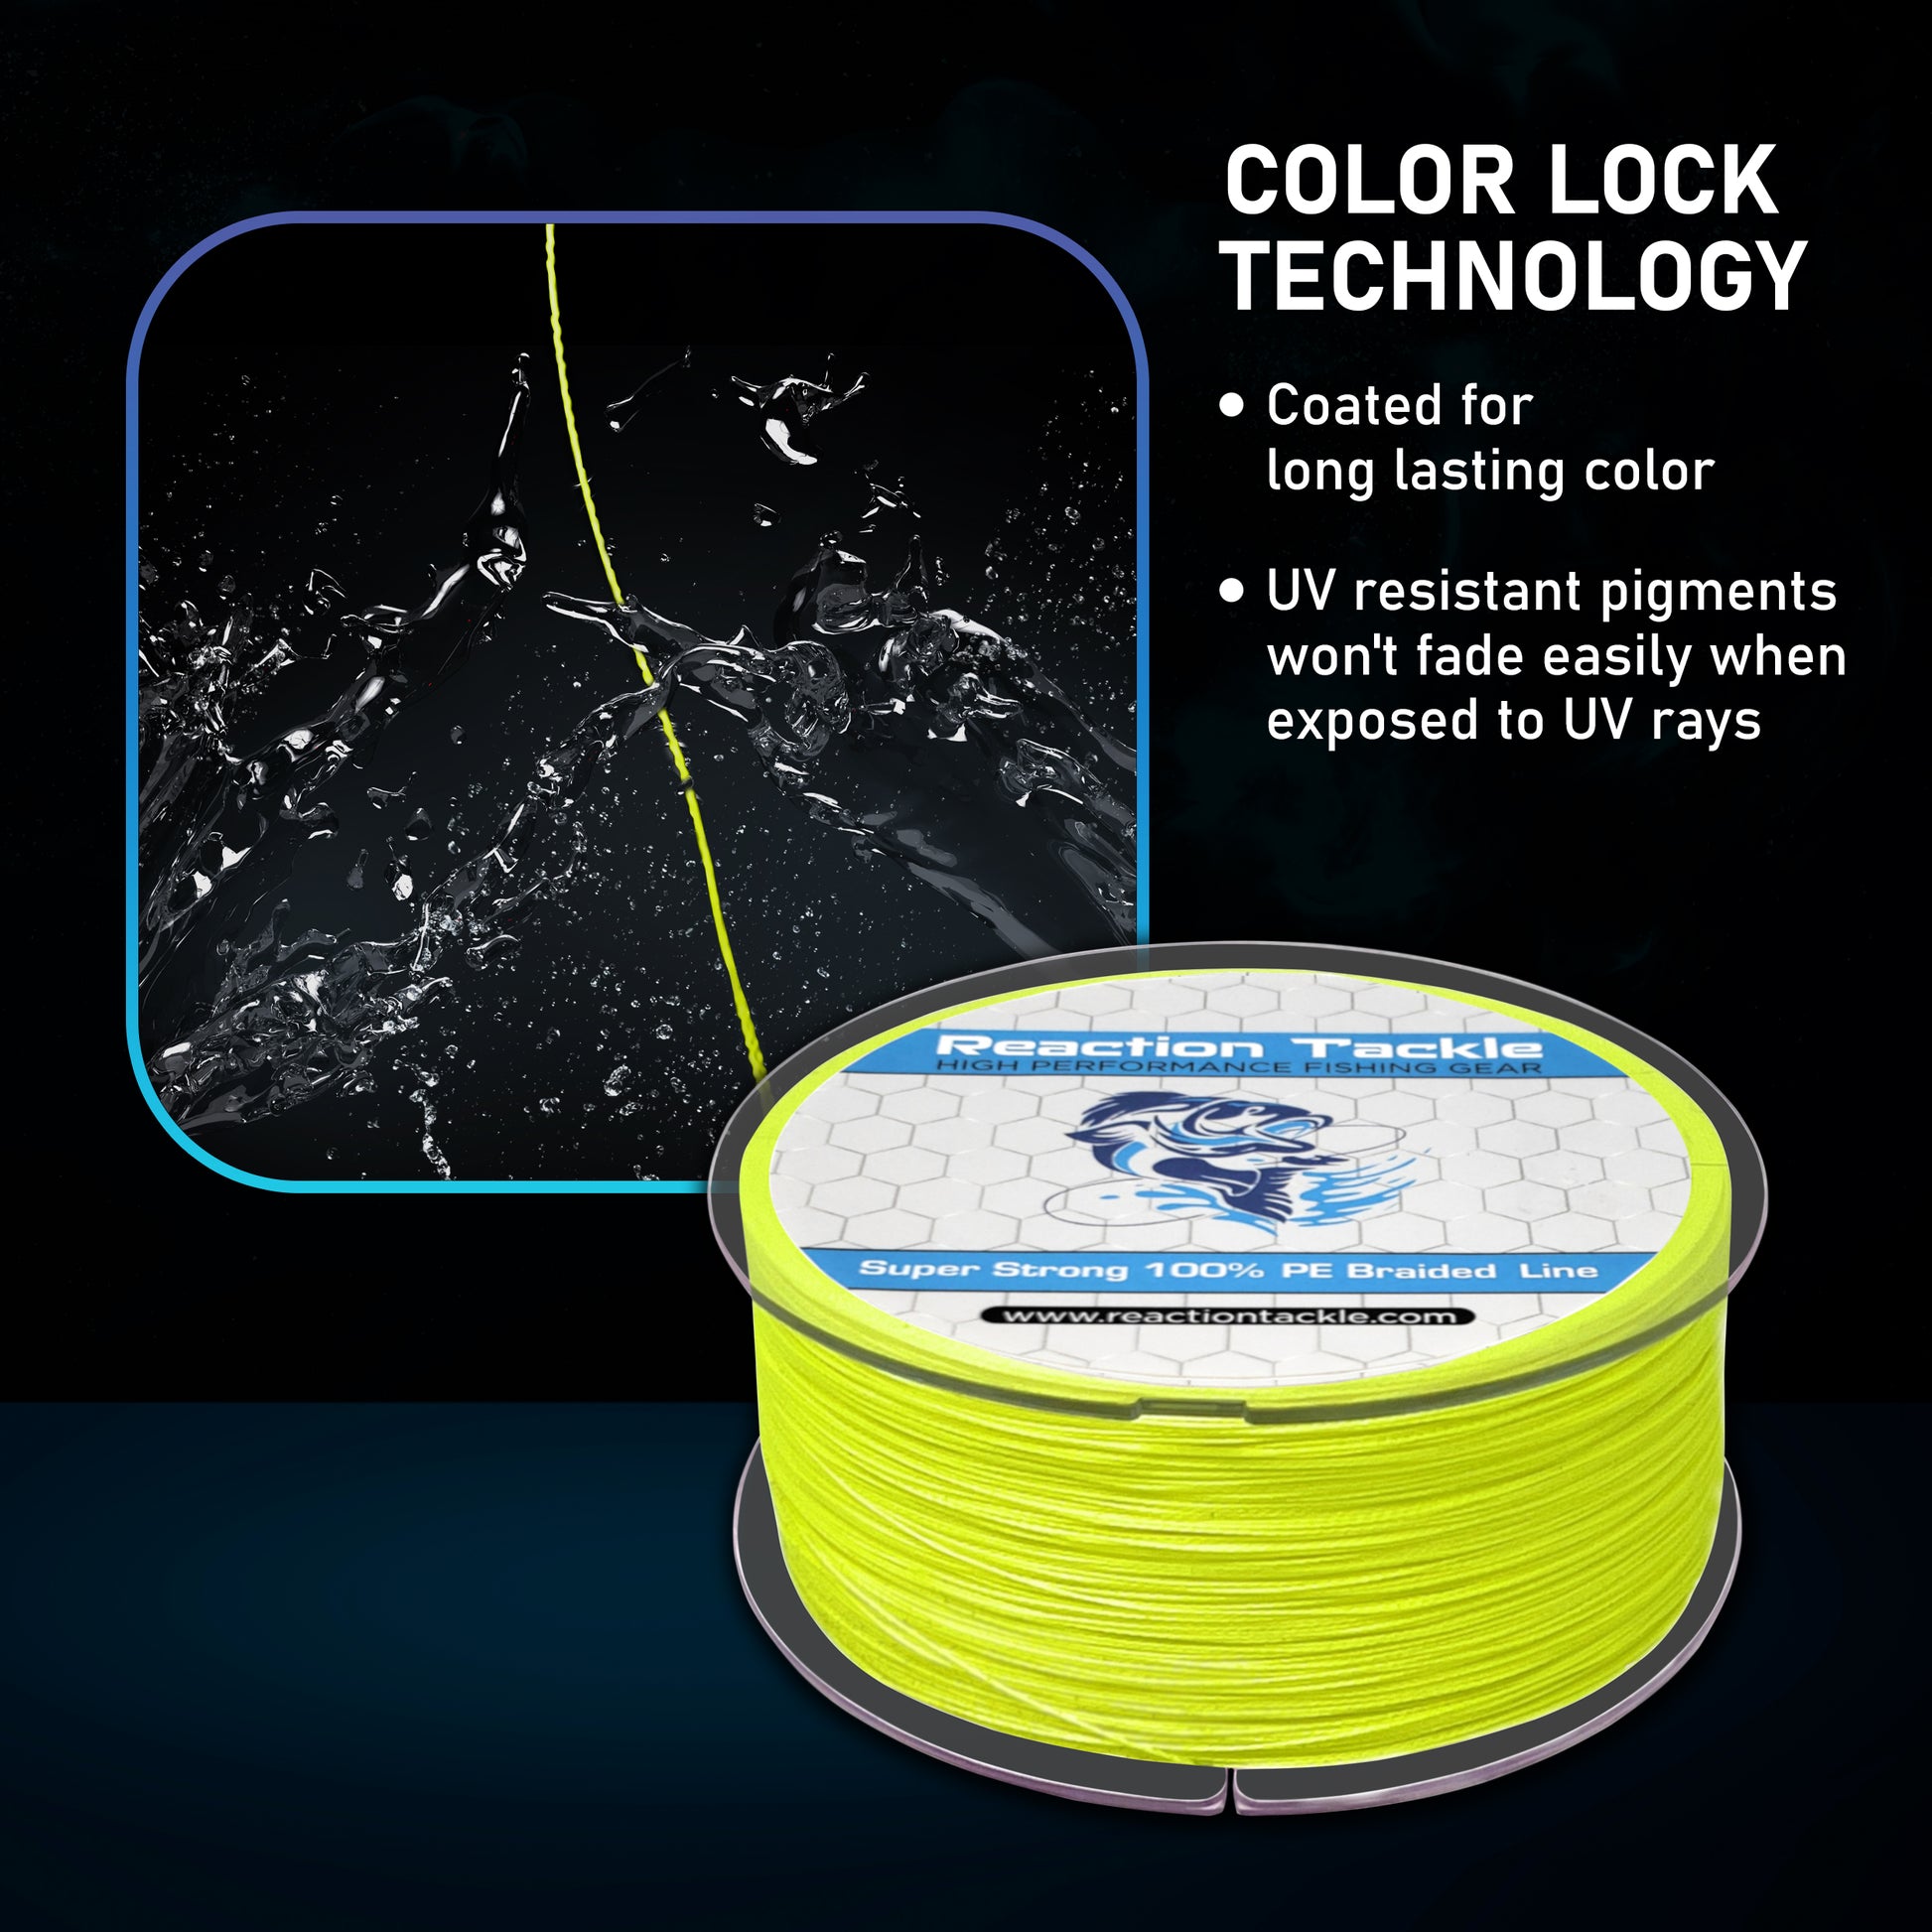 Reaction Tackle Braided Fishing Line - 8 Strand Moss Green 10LB